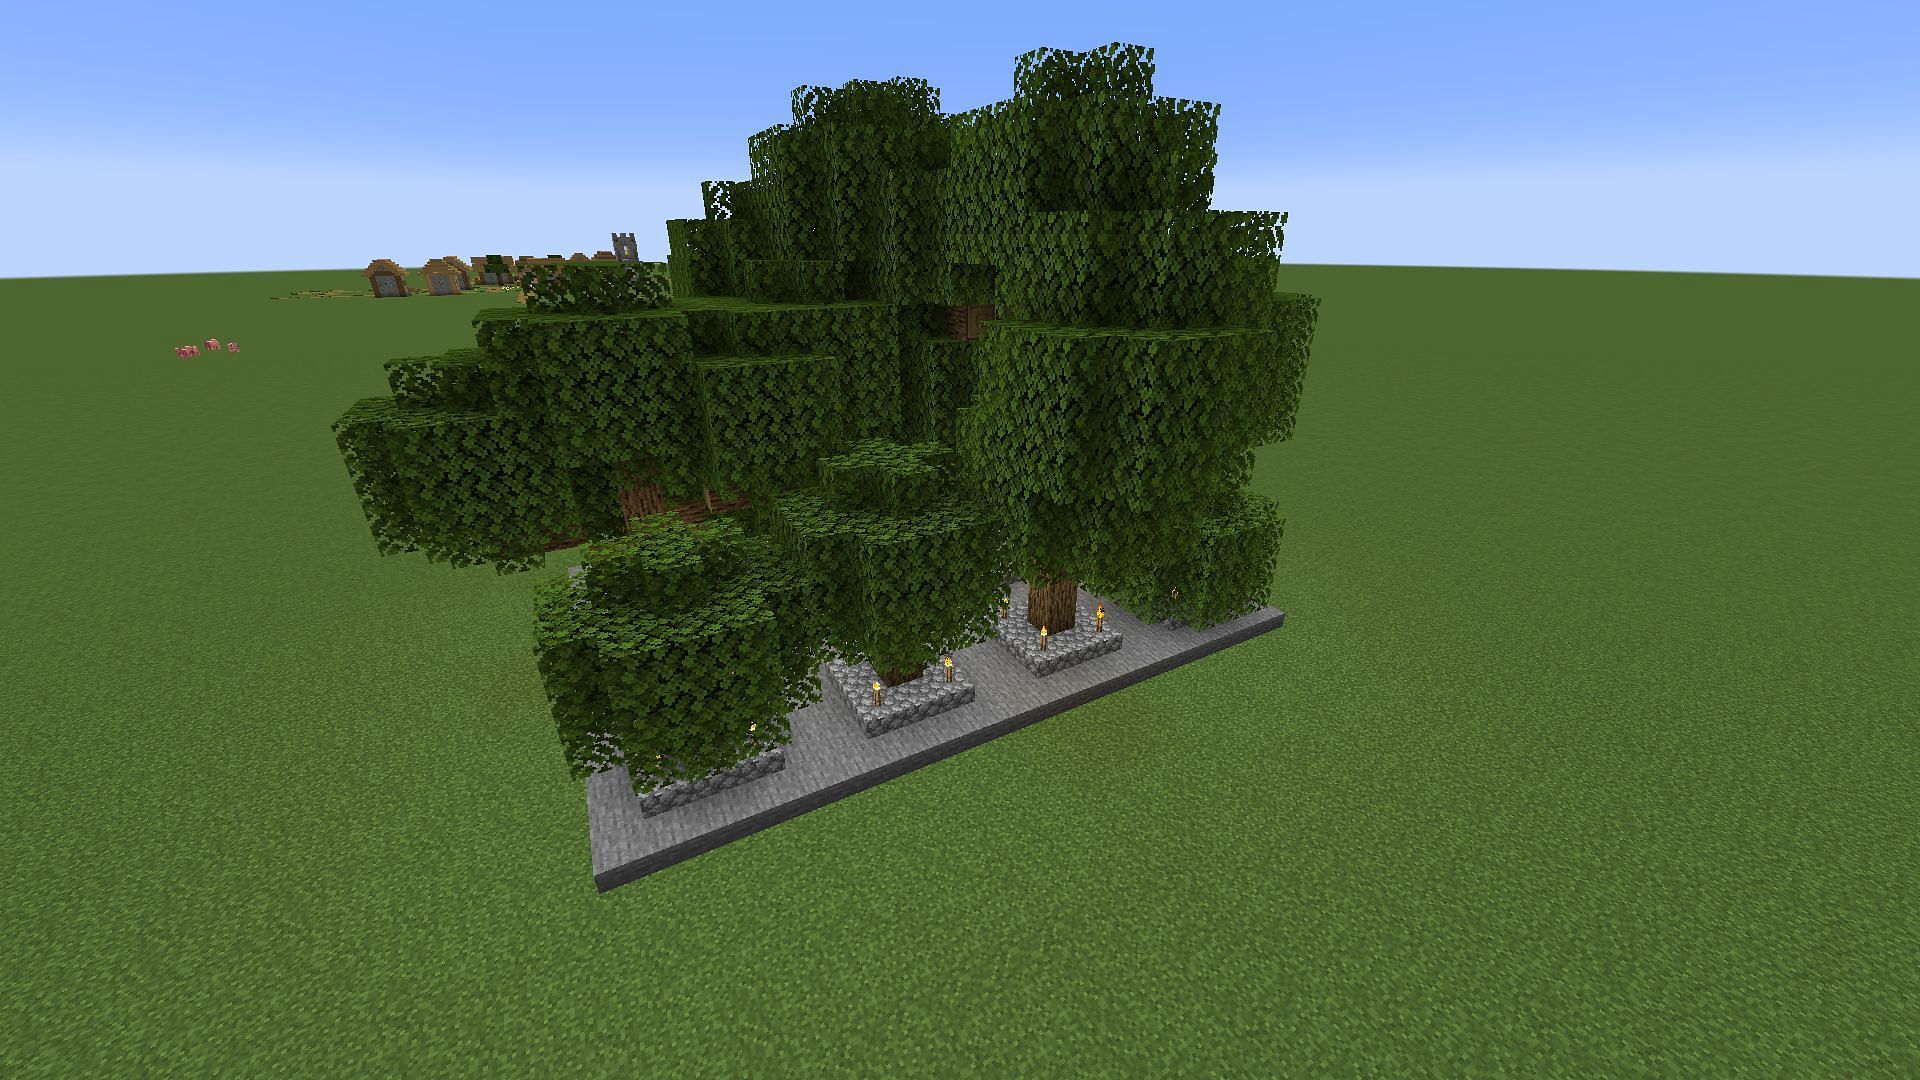 The trees are fully grown and ready to be cut down for their wood (Image via Mojang)